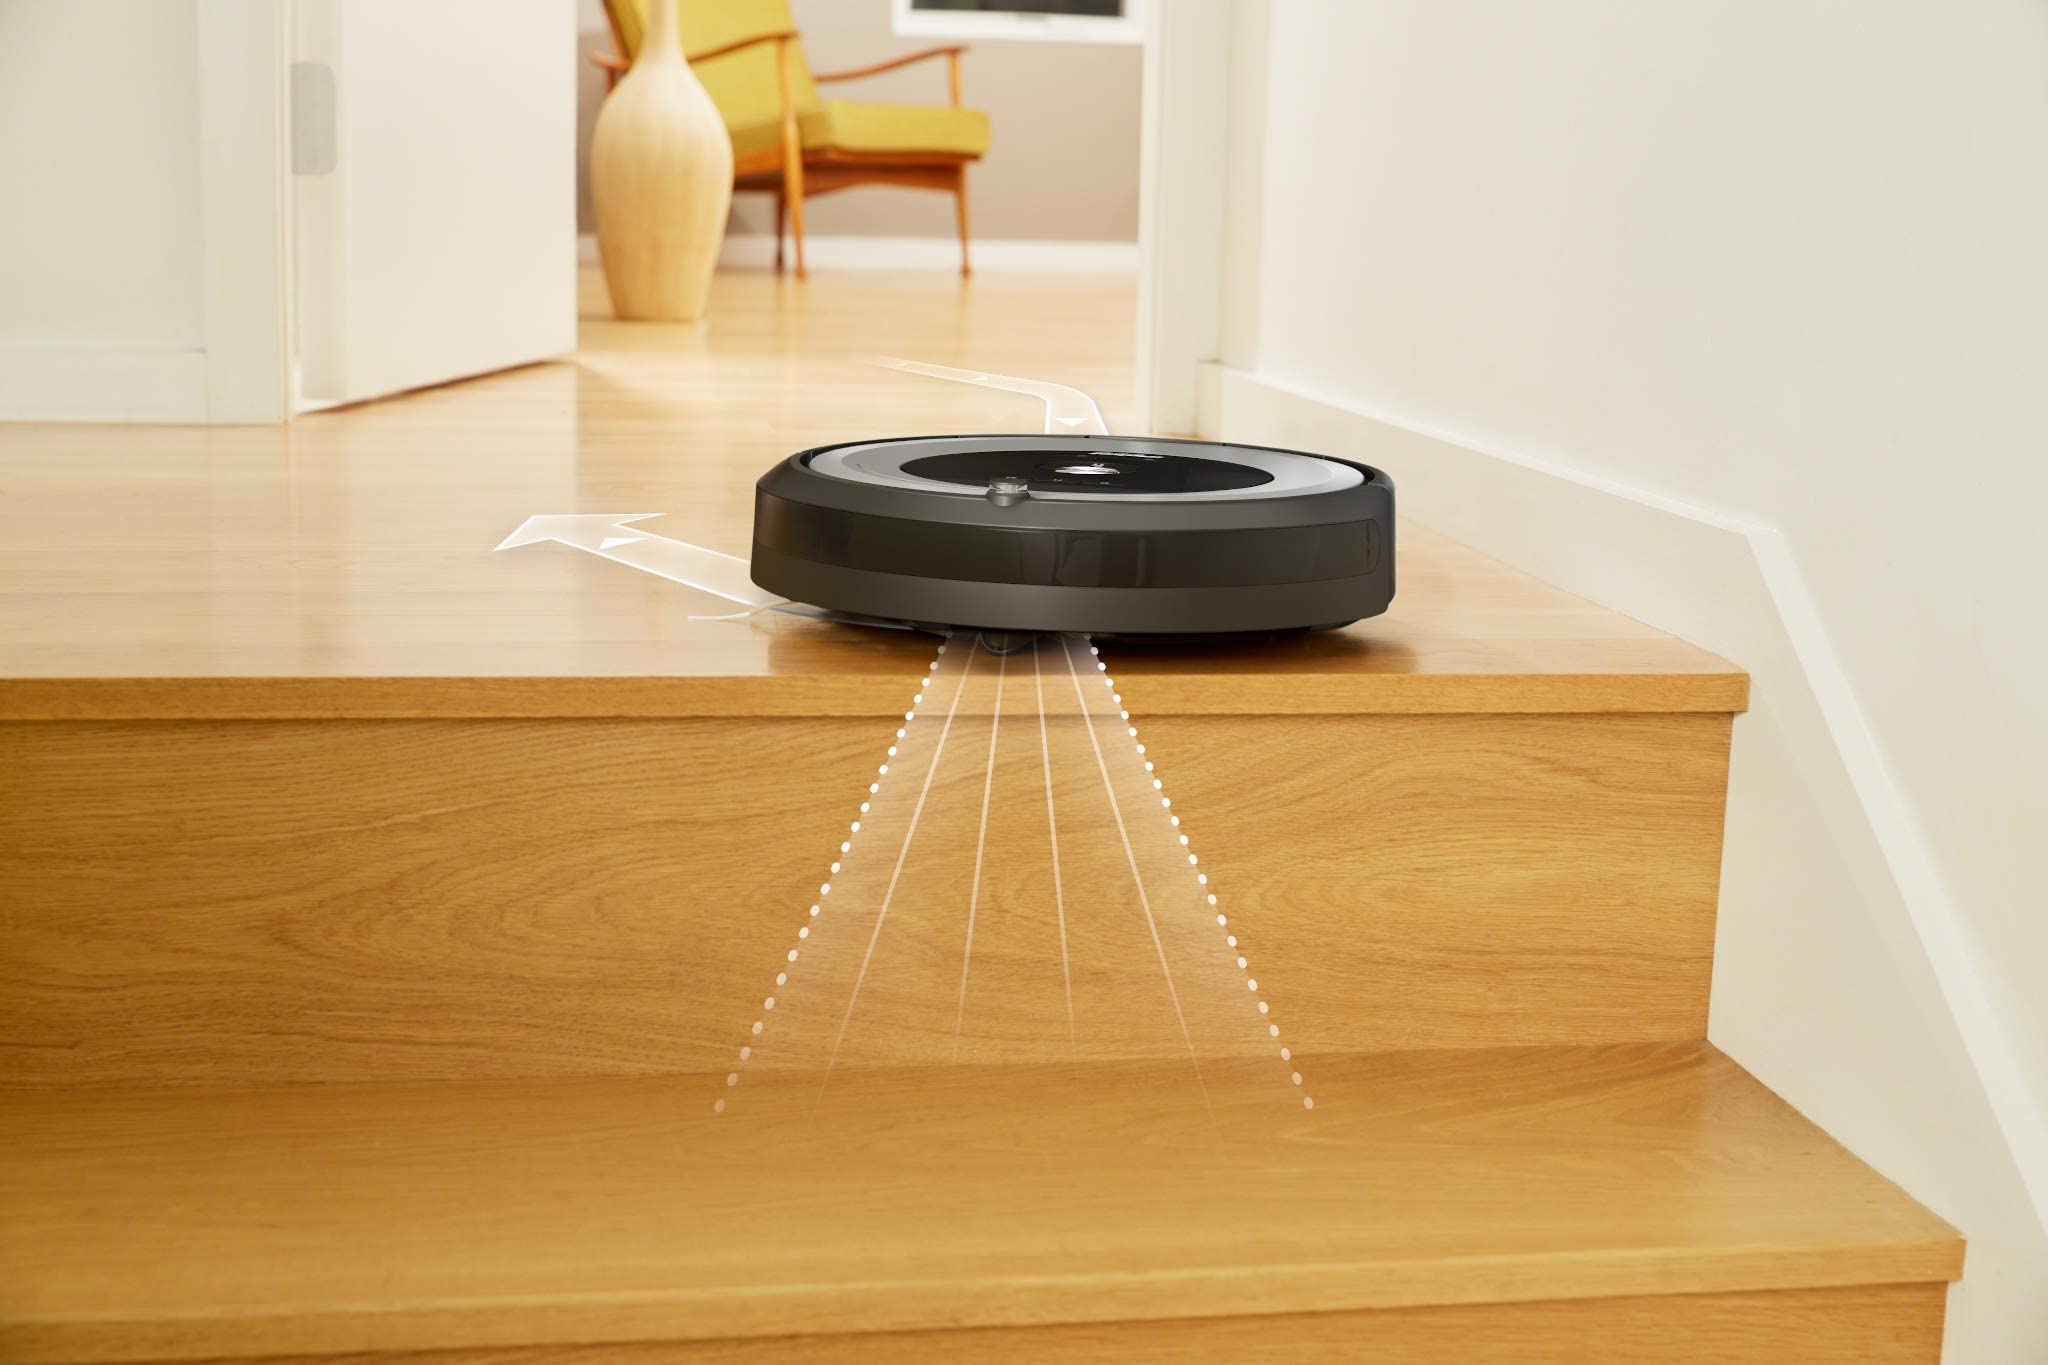 iRobot Roomba 606 Robot Vacuum - Good for Carpets and Hard Floors - Dirt Detect Technology - 3 Stage Cleaning System